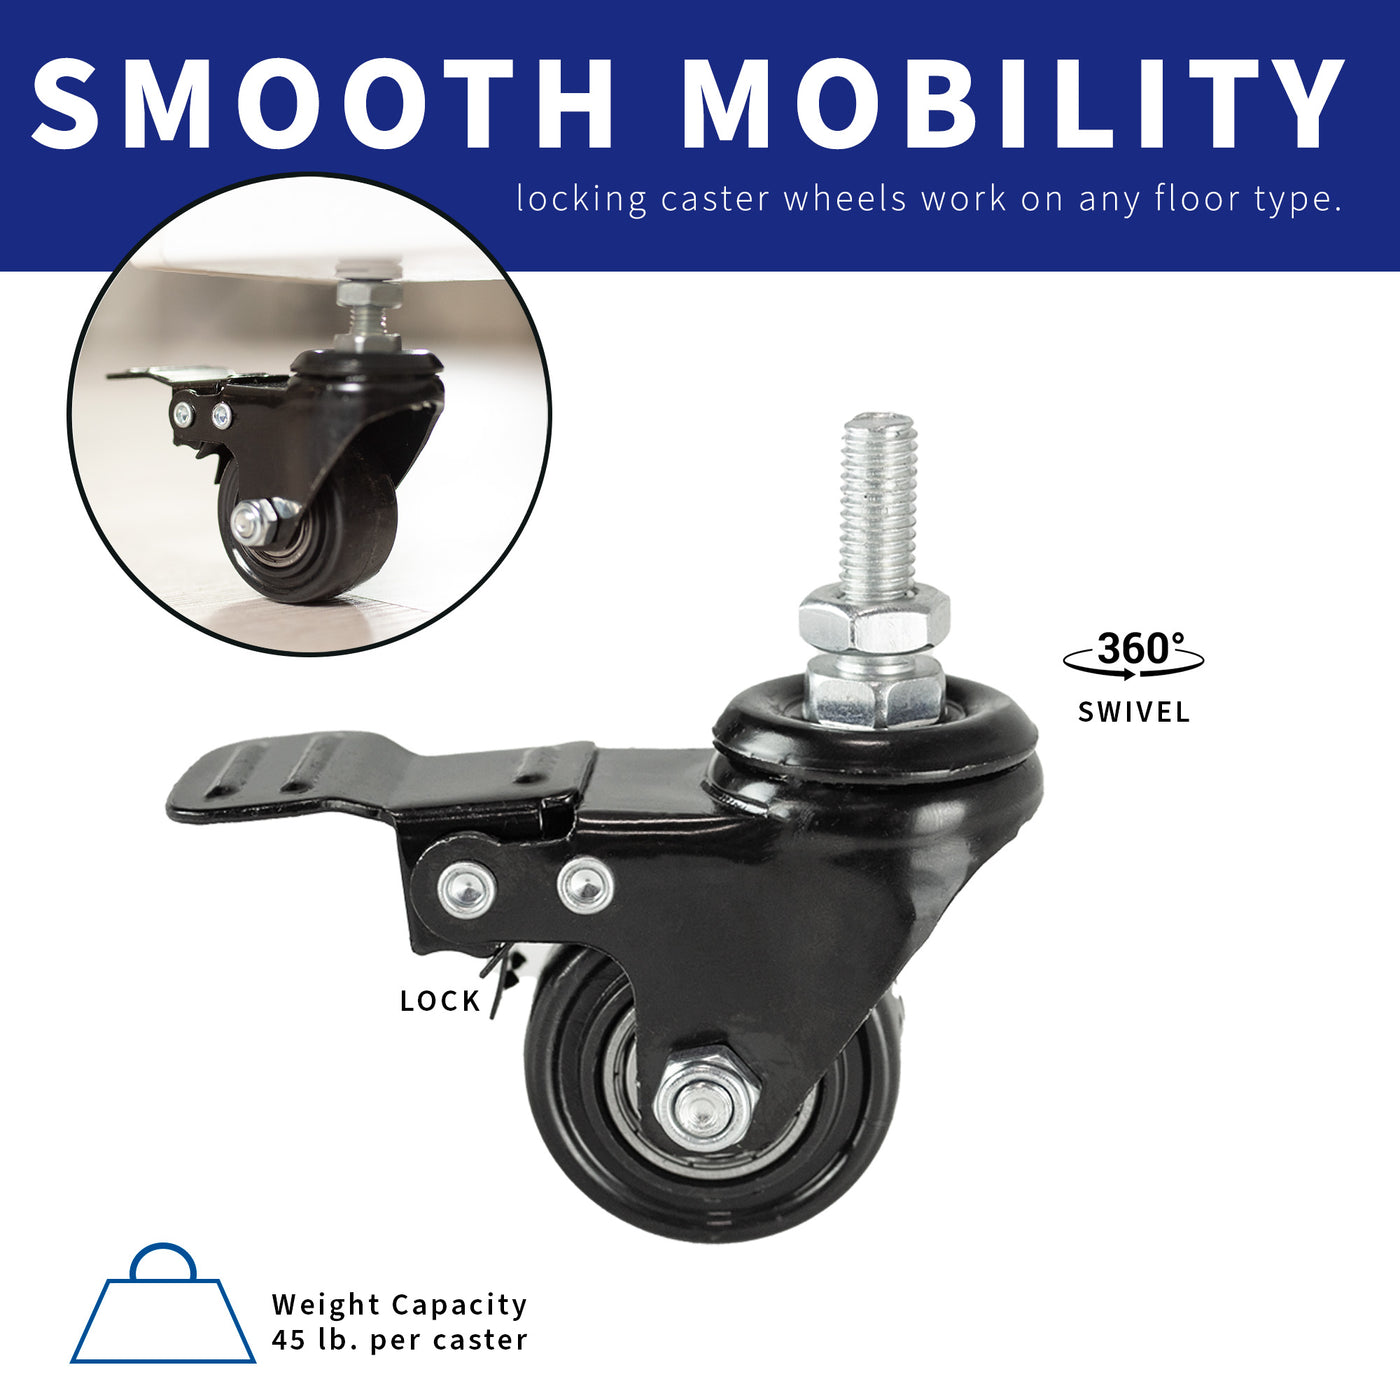 Locking caster wheels with smooth mobility and full rotation.